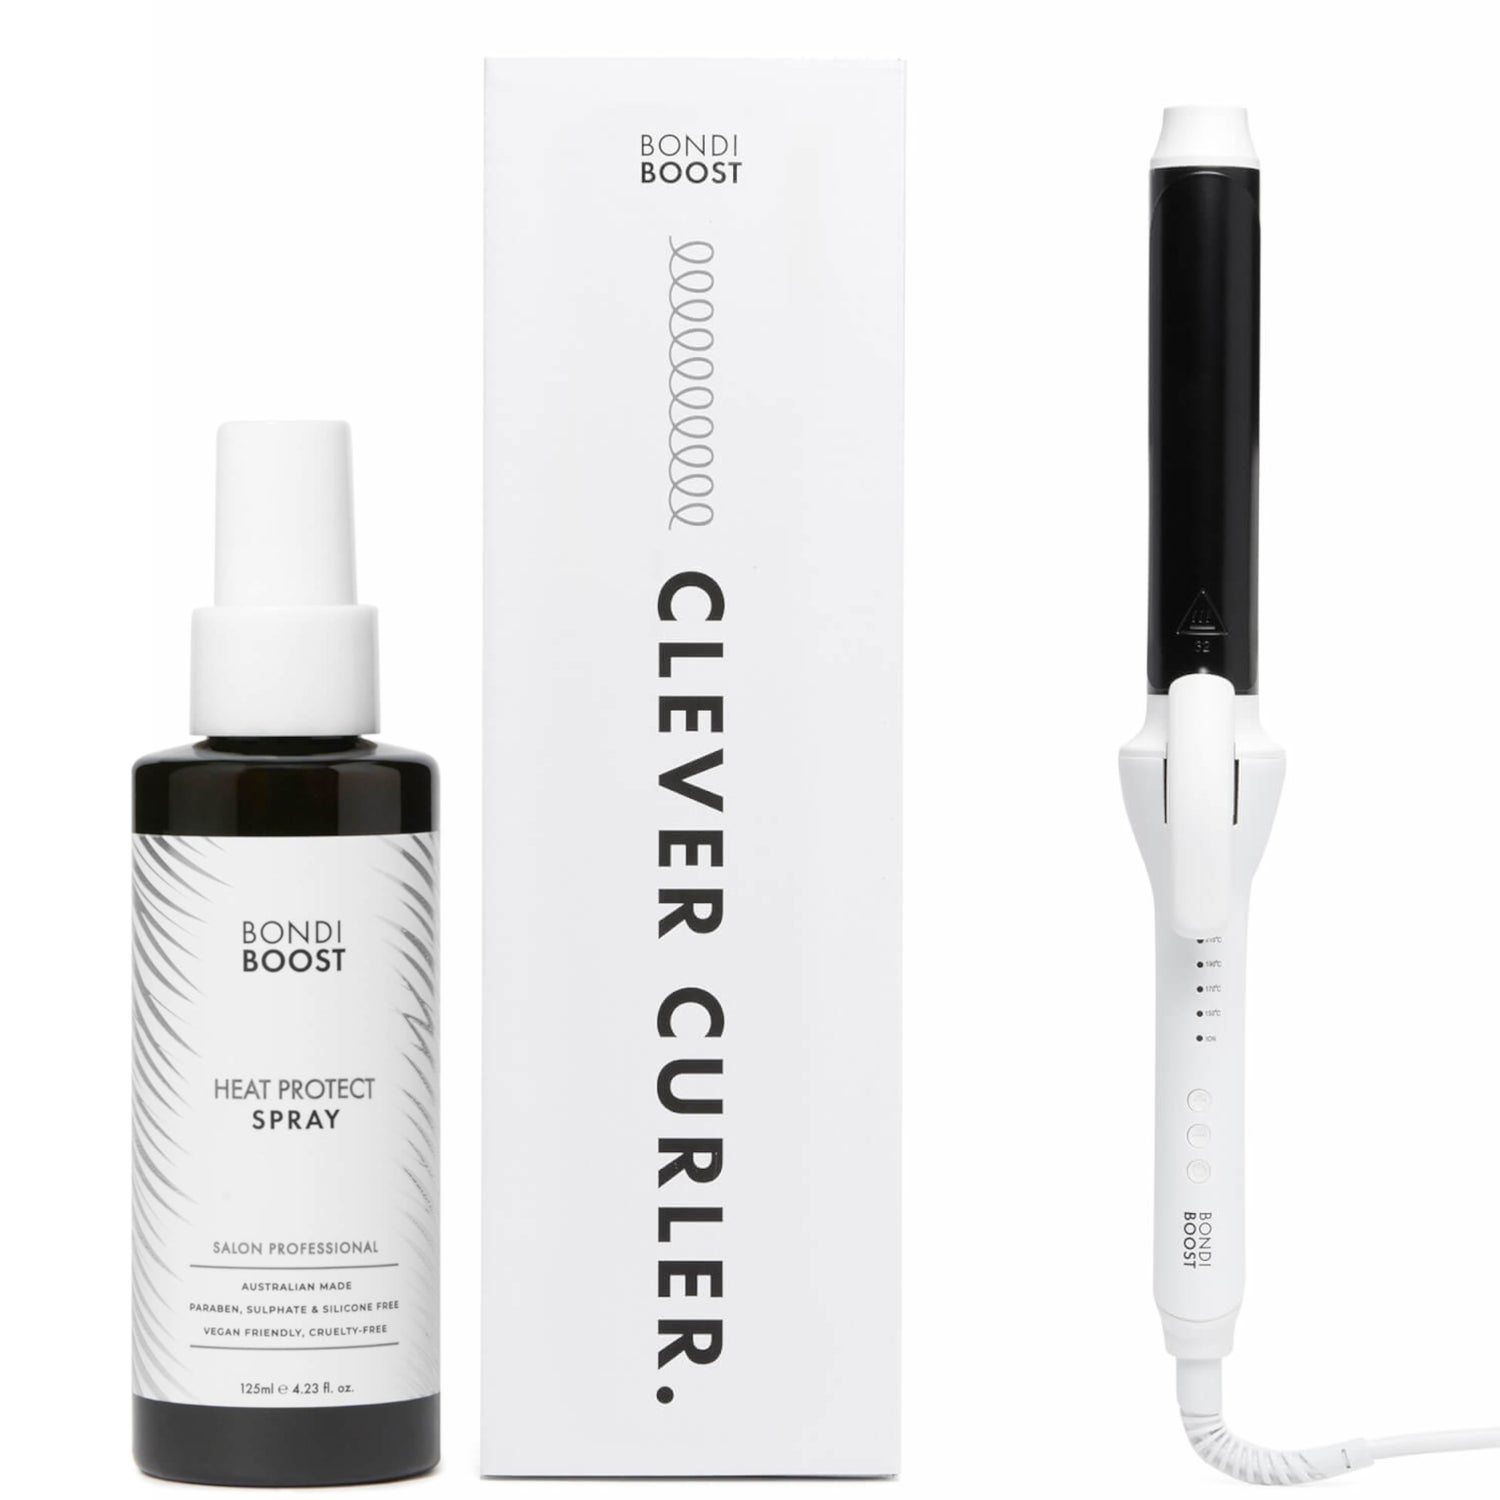 BondiBoost Clever Curler and Heat Protect Spray 125ml Bundle (Worth $118.00)